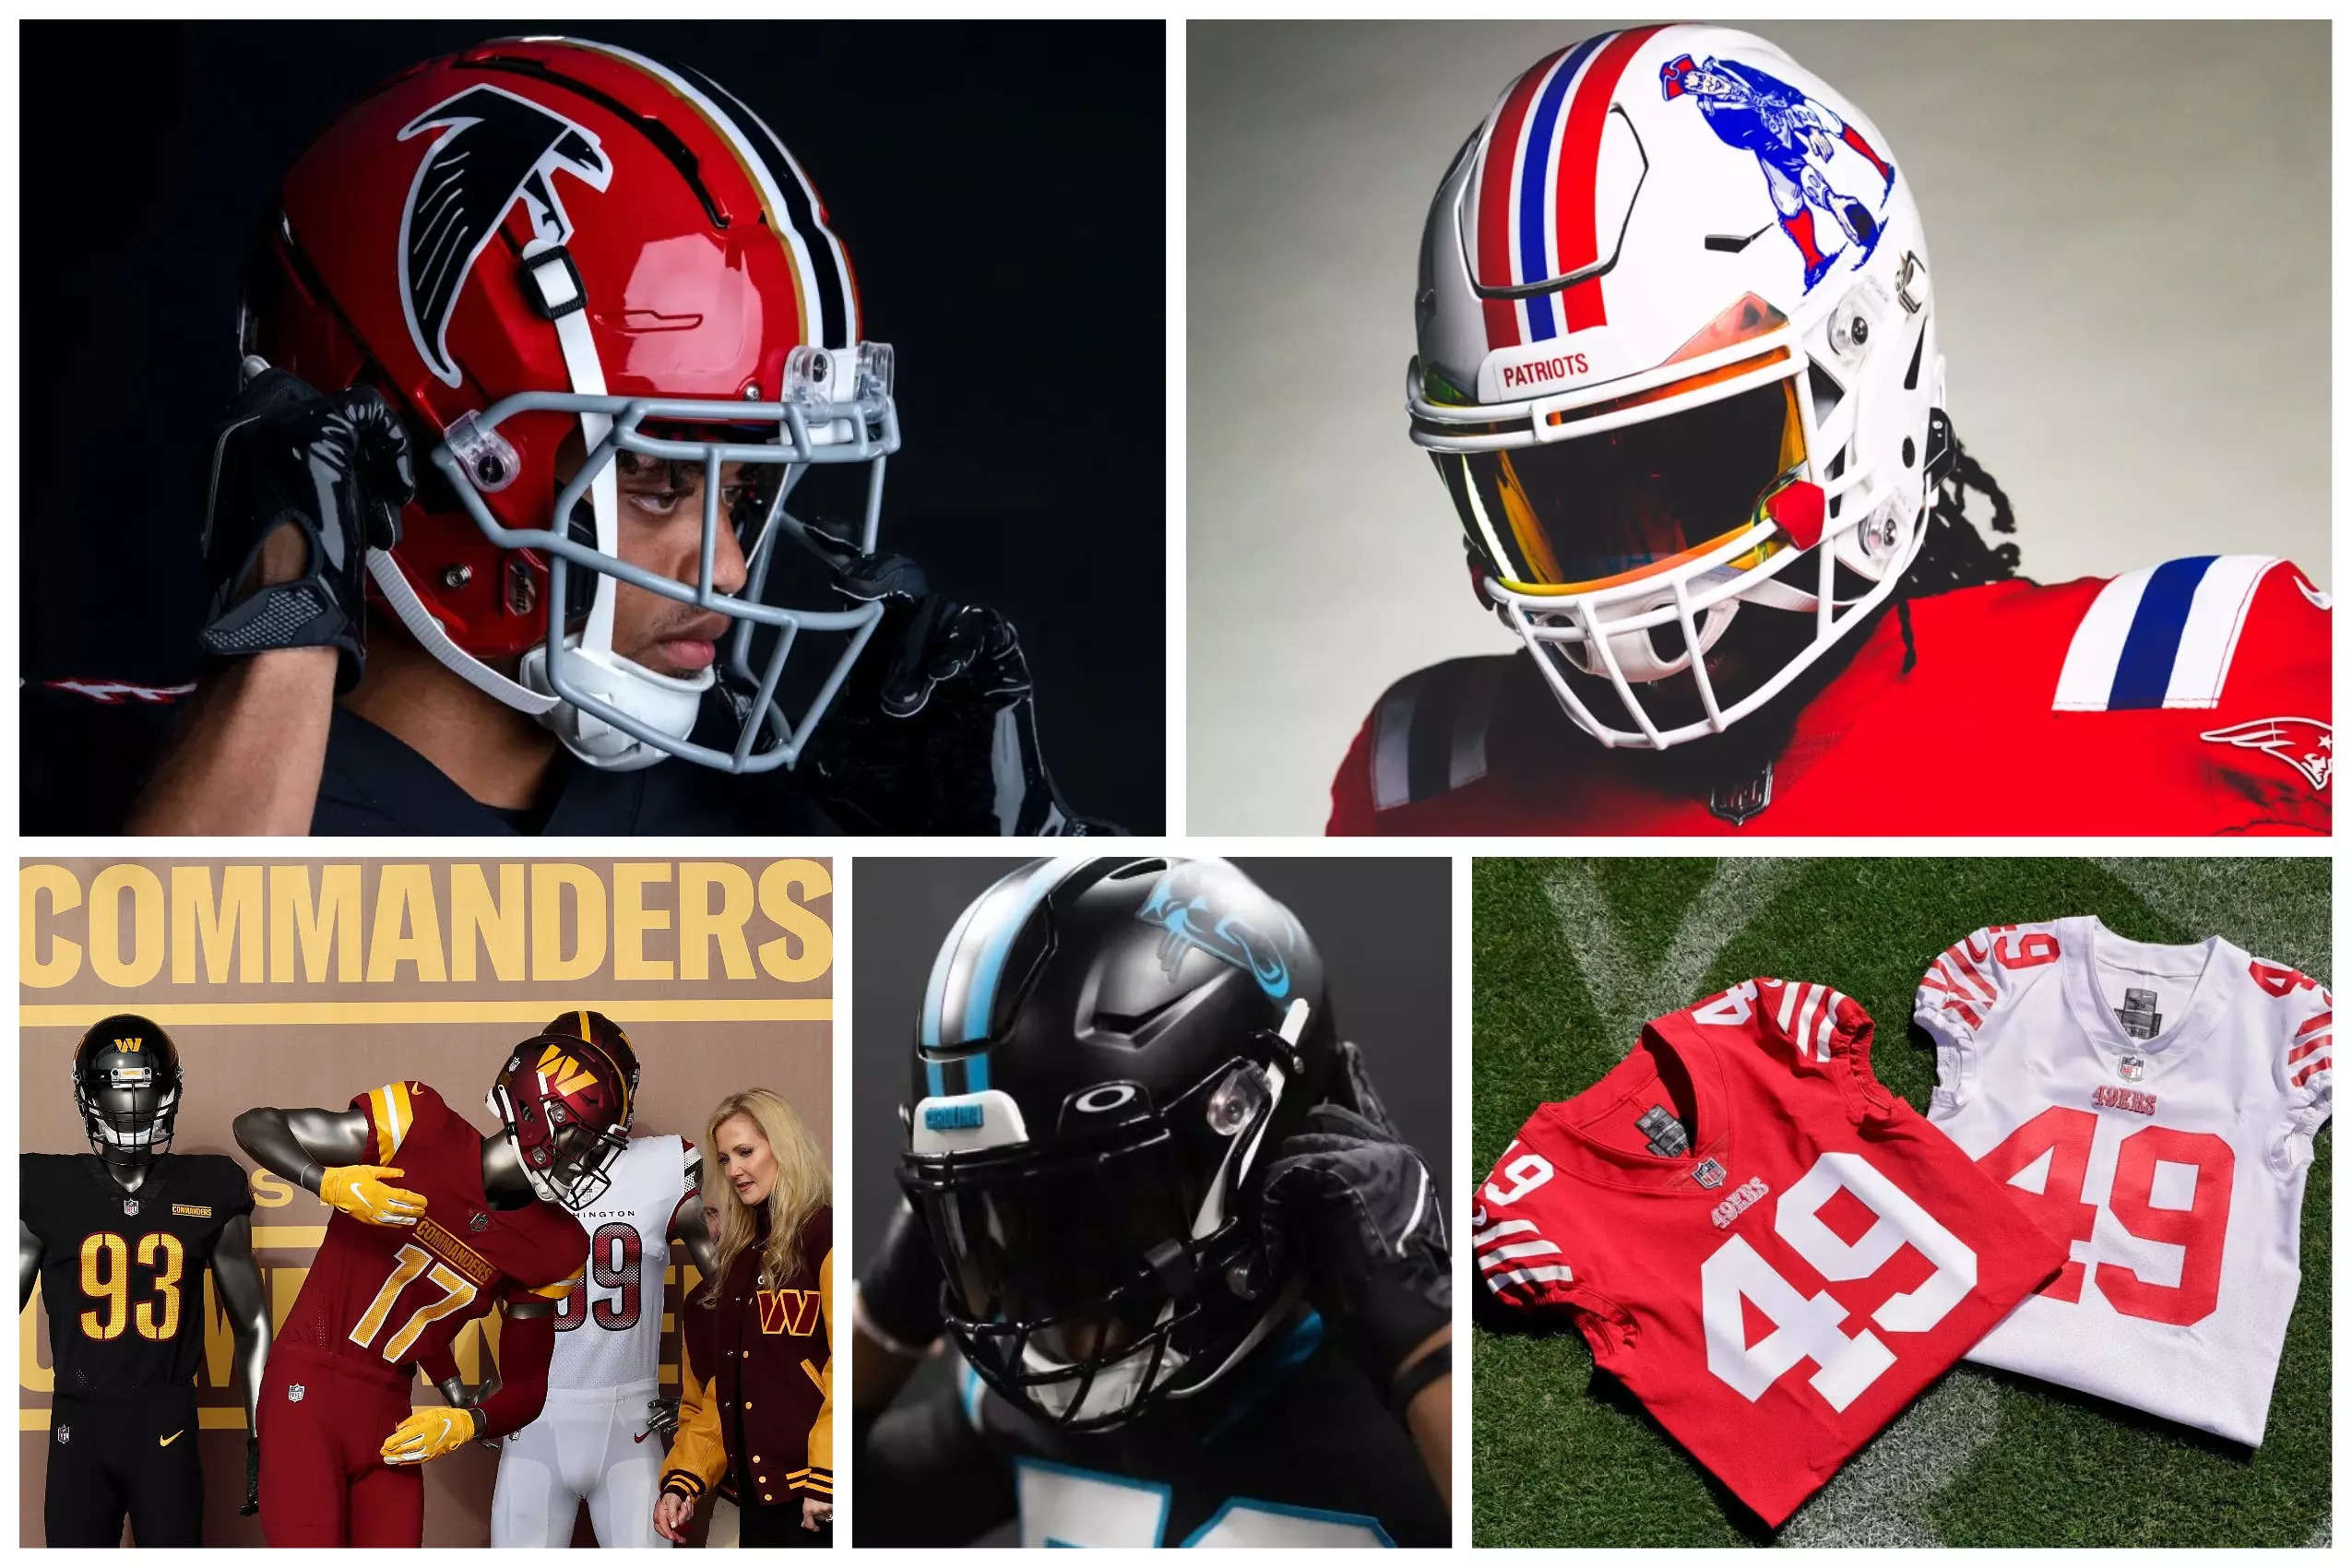 All the NFL teams with new uniforms and helmets for the 2022 season